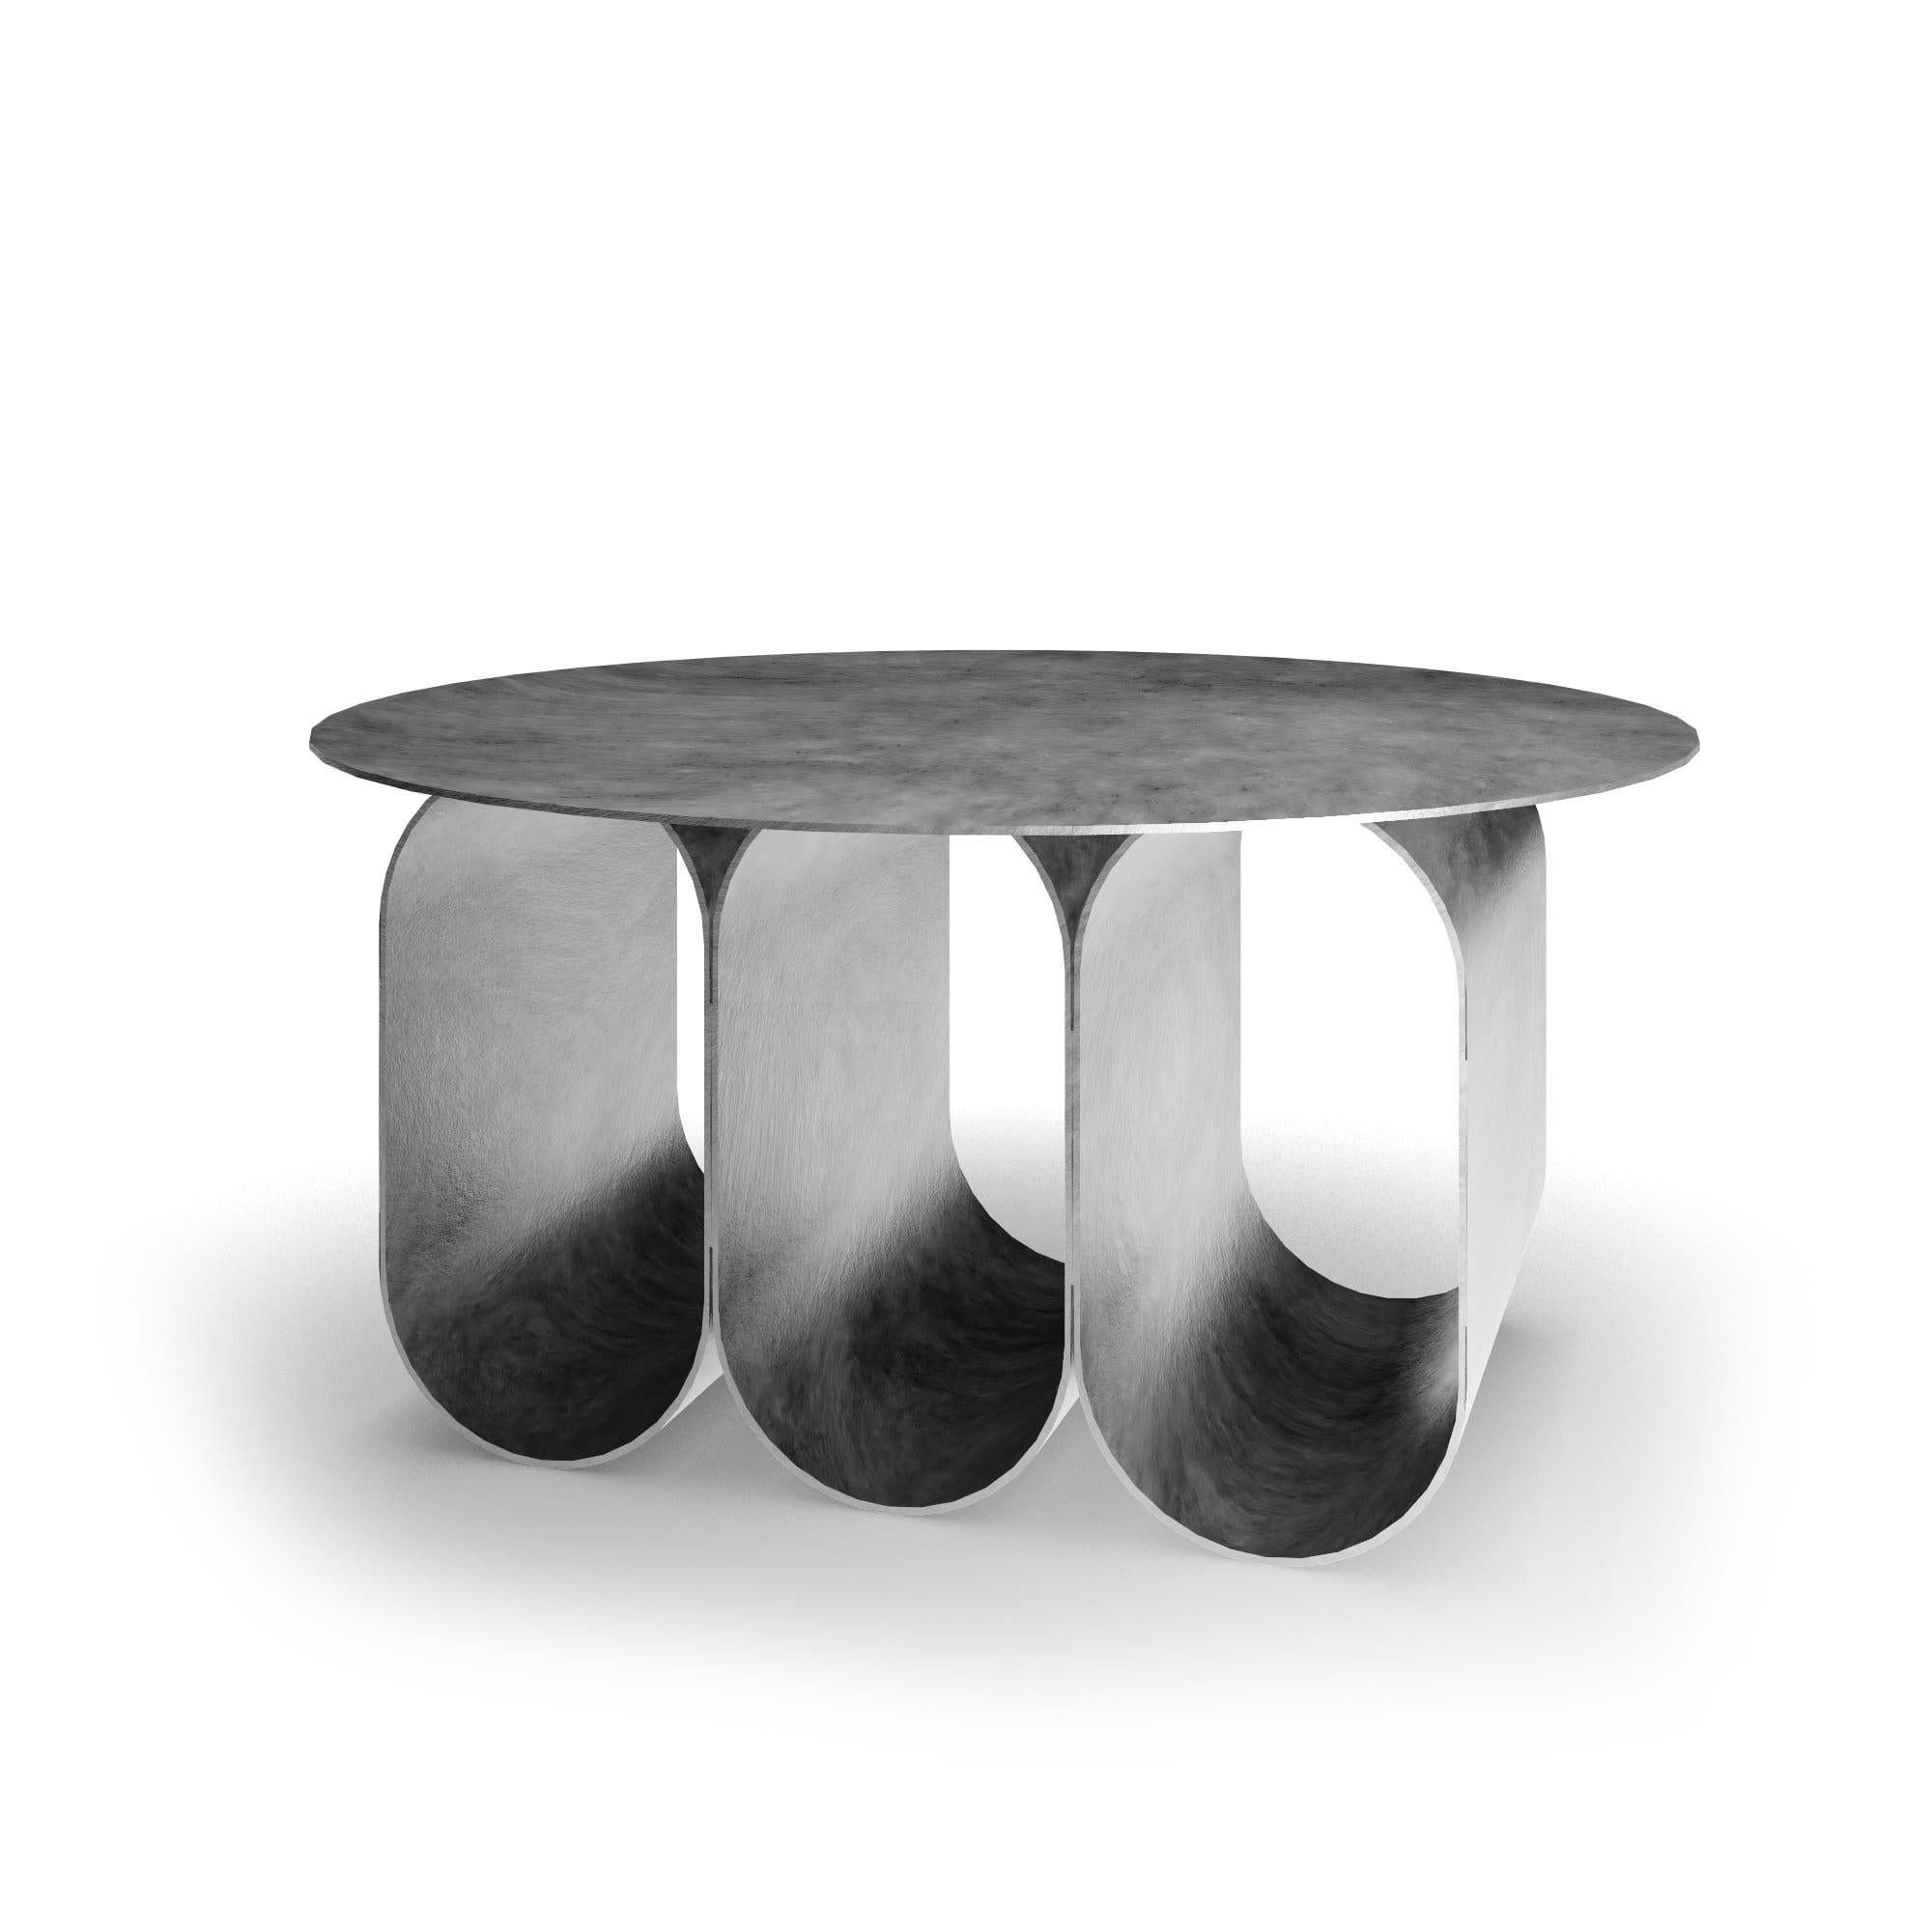 The Arcade coffee table - 3 arches round version - natural silver, has been created By Kasadamo in collaboration with Pierre Tassin, french designer. This table reflects a mix between old and futuristic architecture. Its identity is found in the